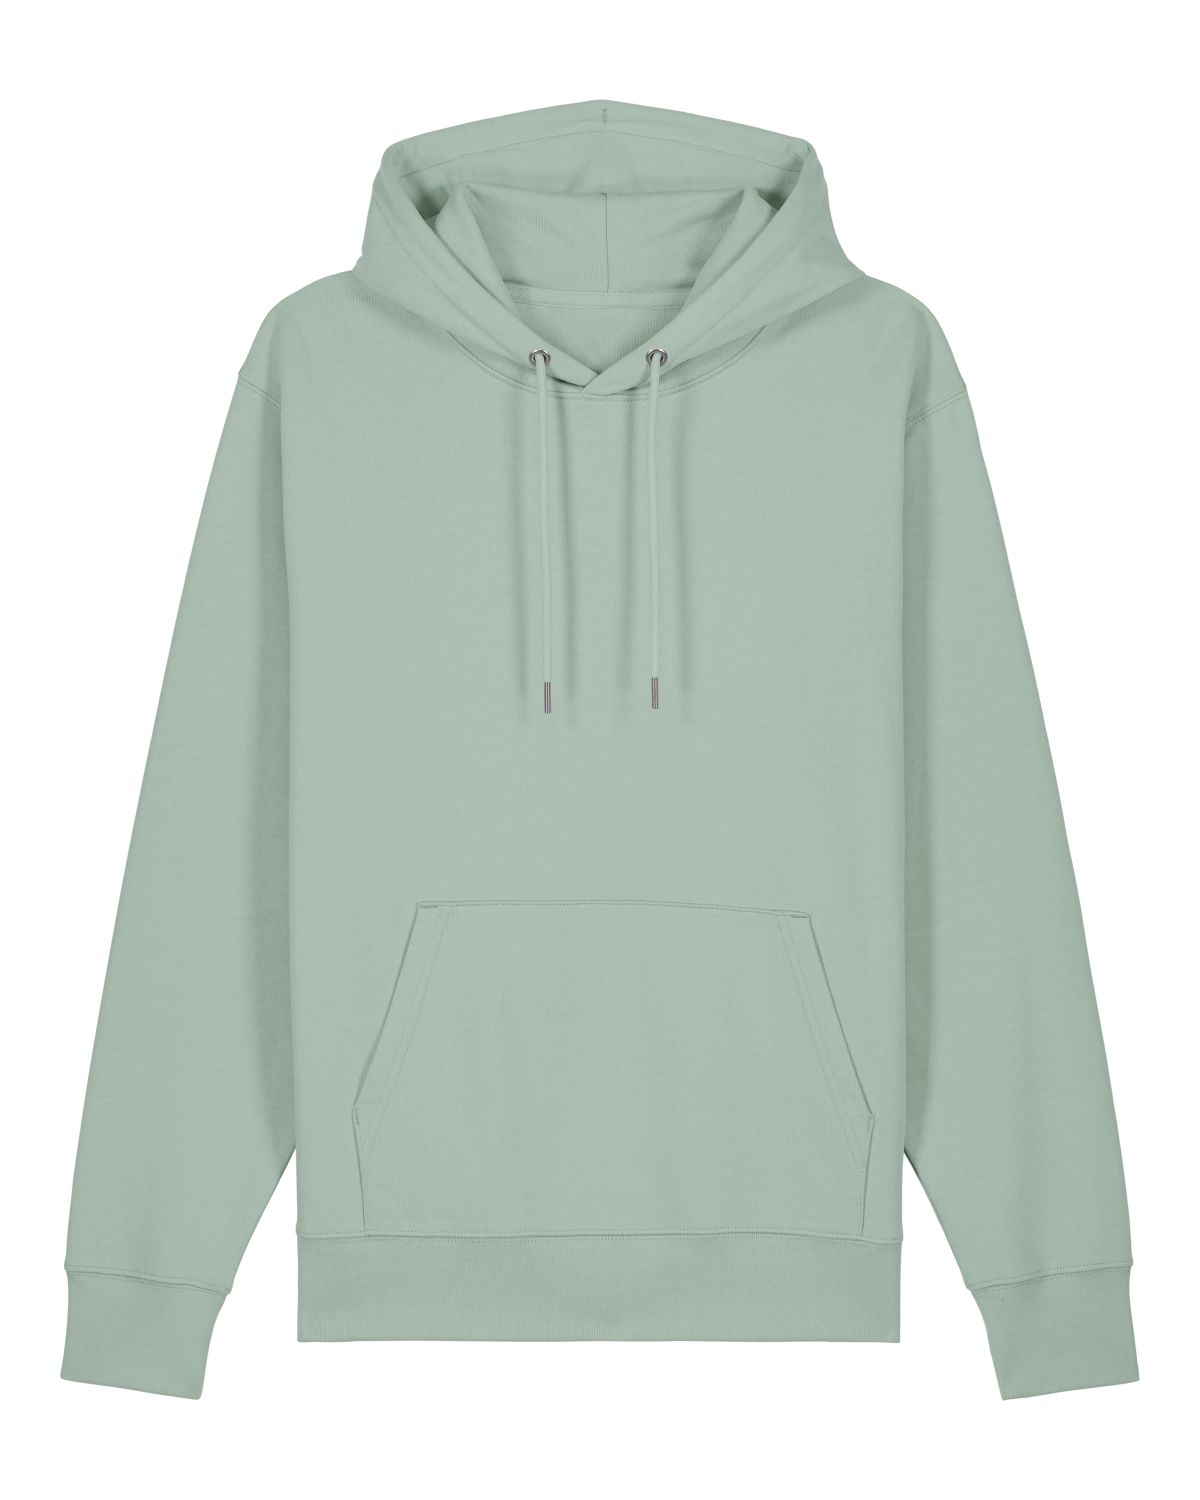 Customize your own sustainable hoodie made of 100% GOTS-certified organic cotton